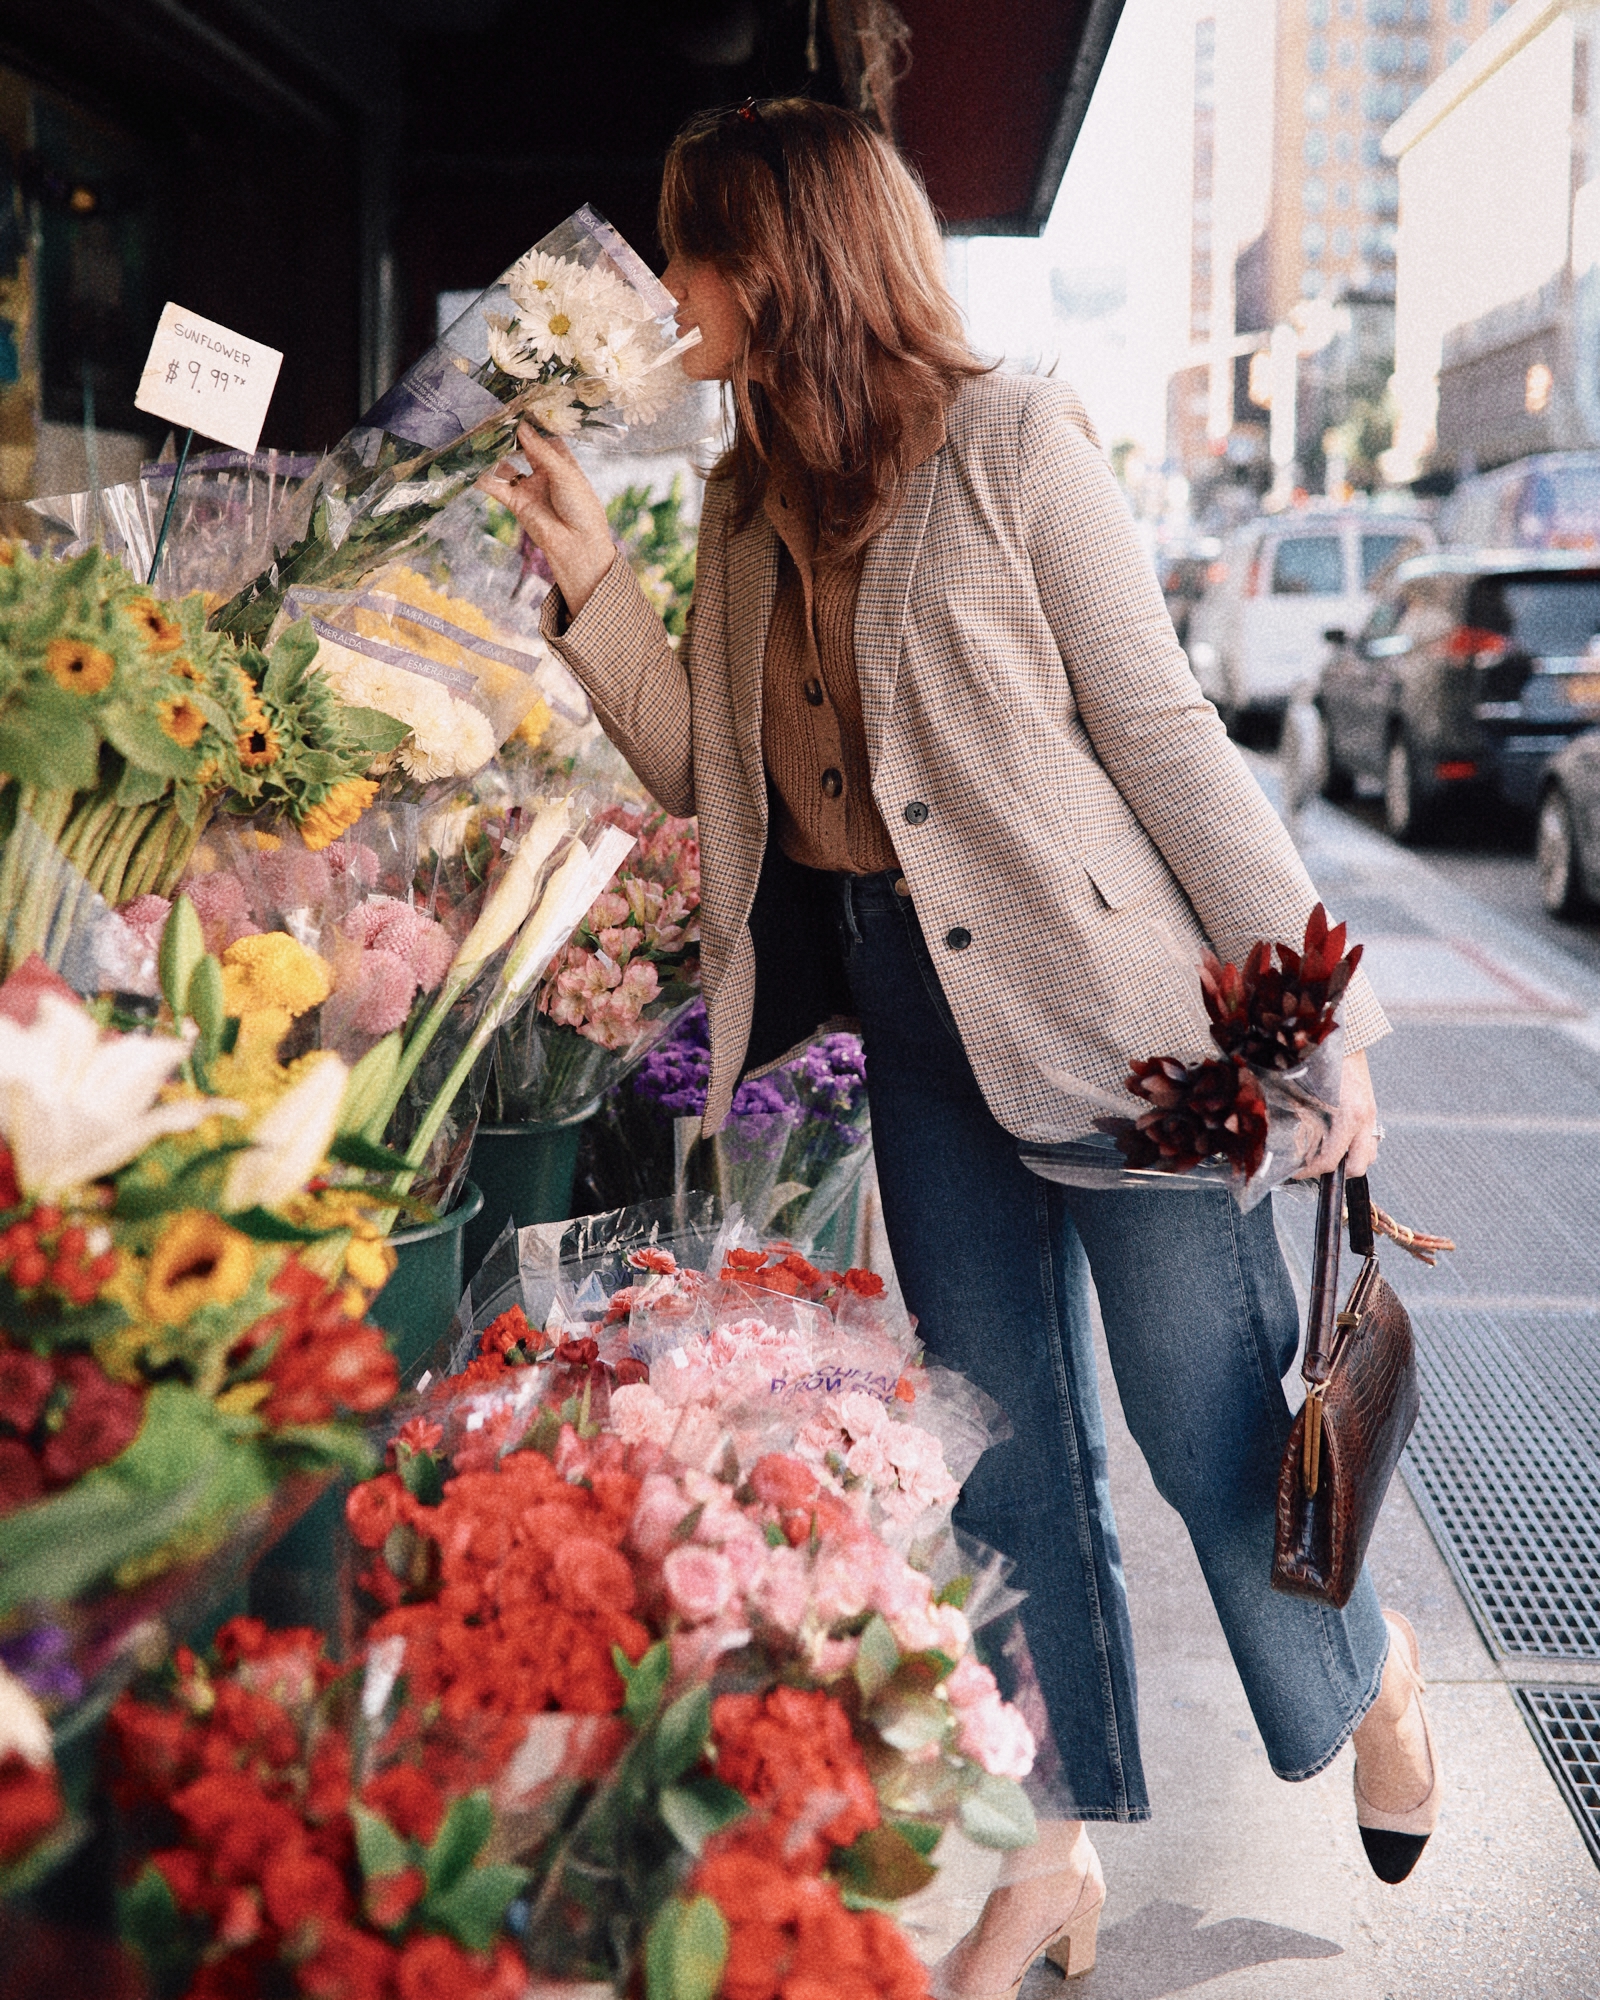 Anna smelling flowers in New York City.